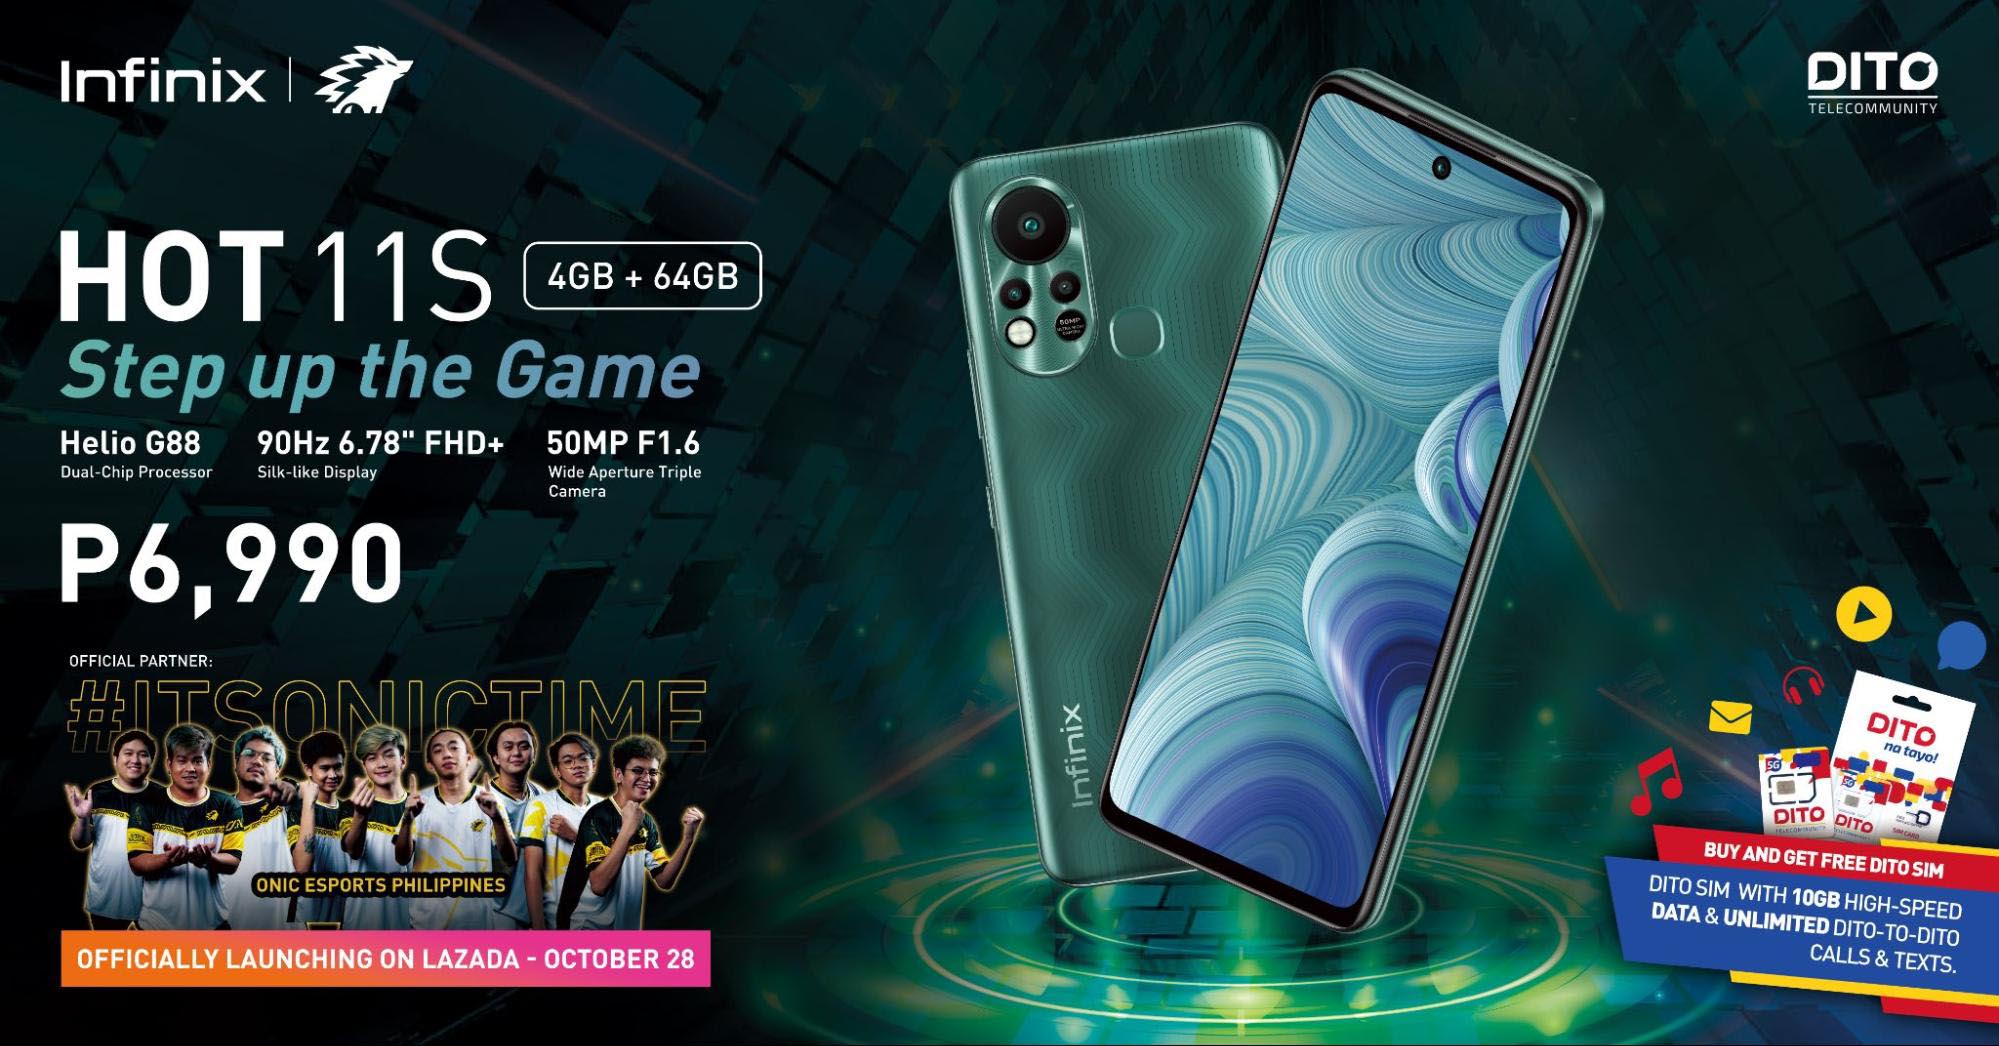 Infinix forges partnership with professional esport team ONIC Philippines